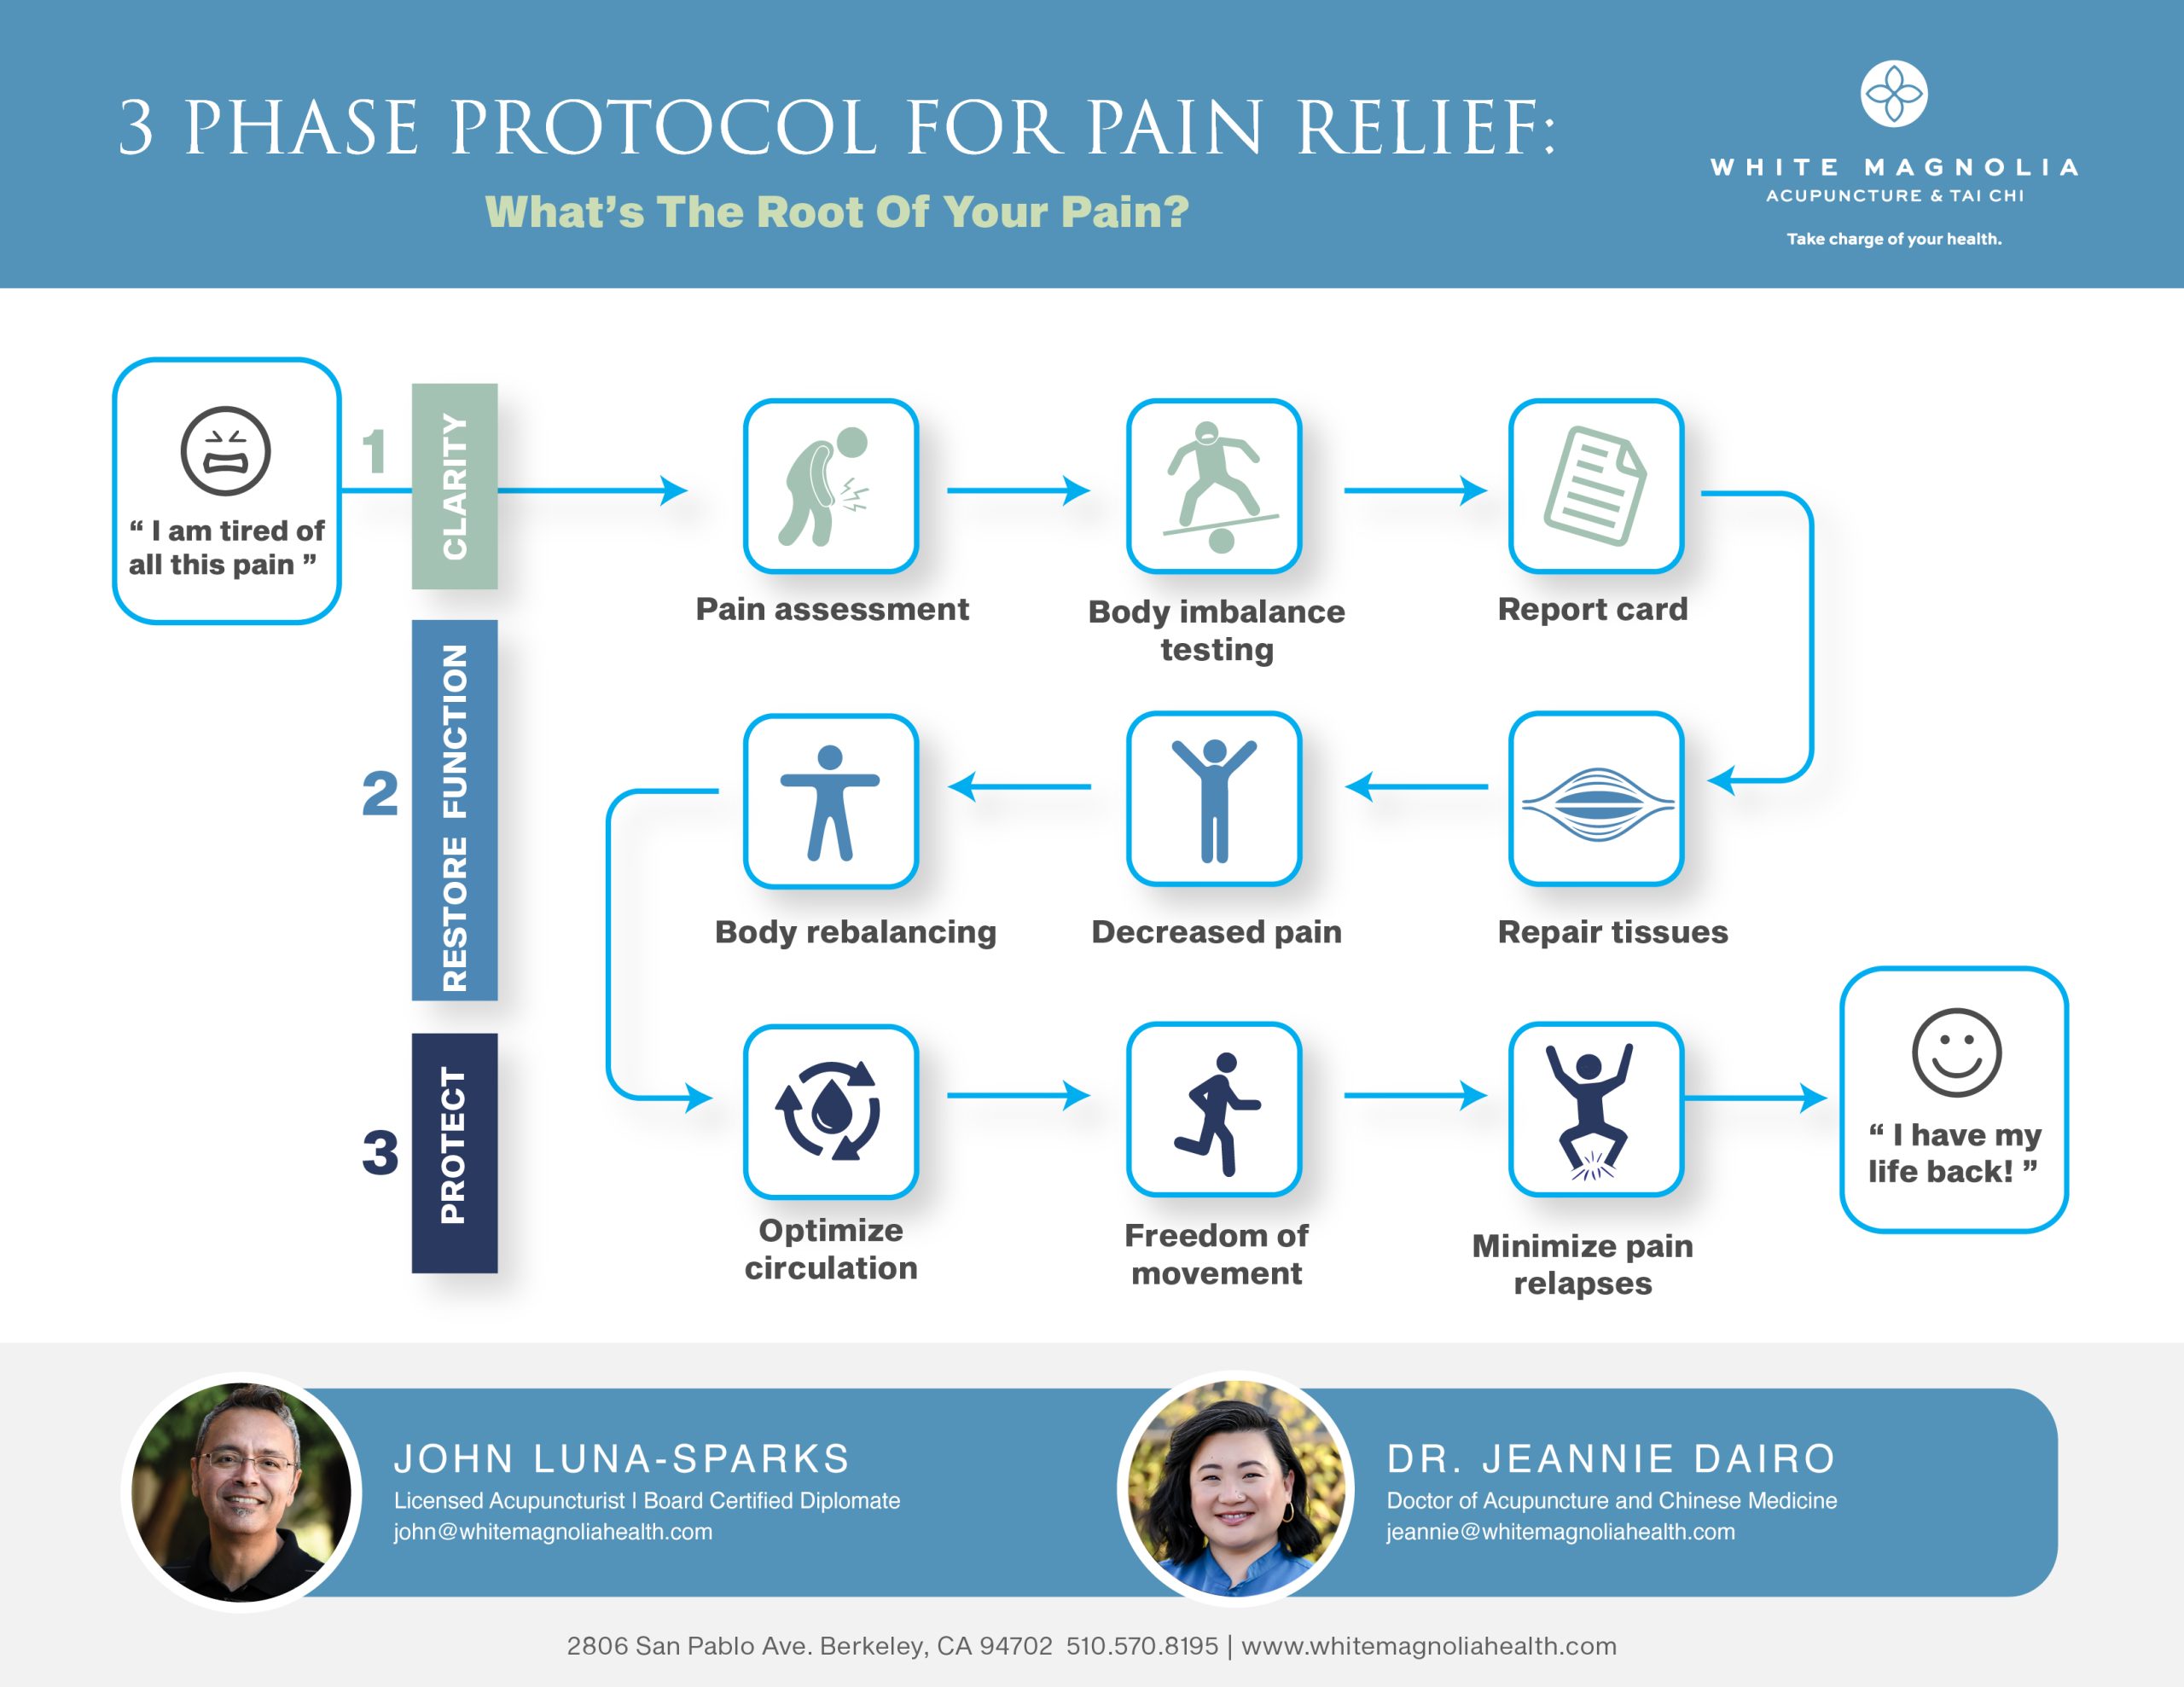 3 phase protocol for pain relief